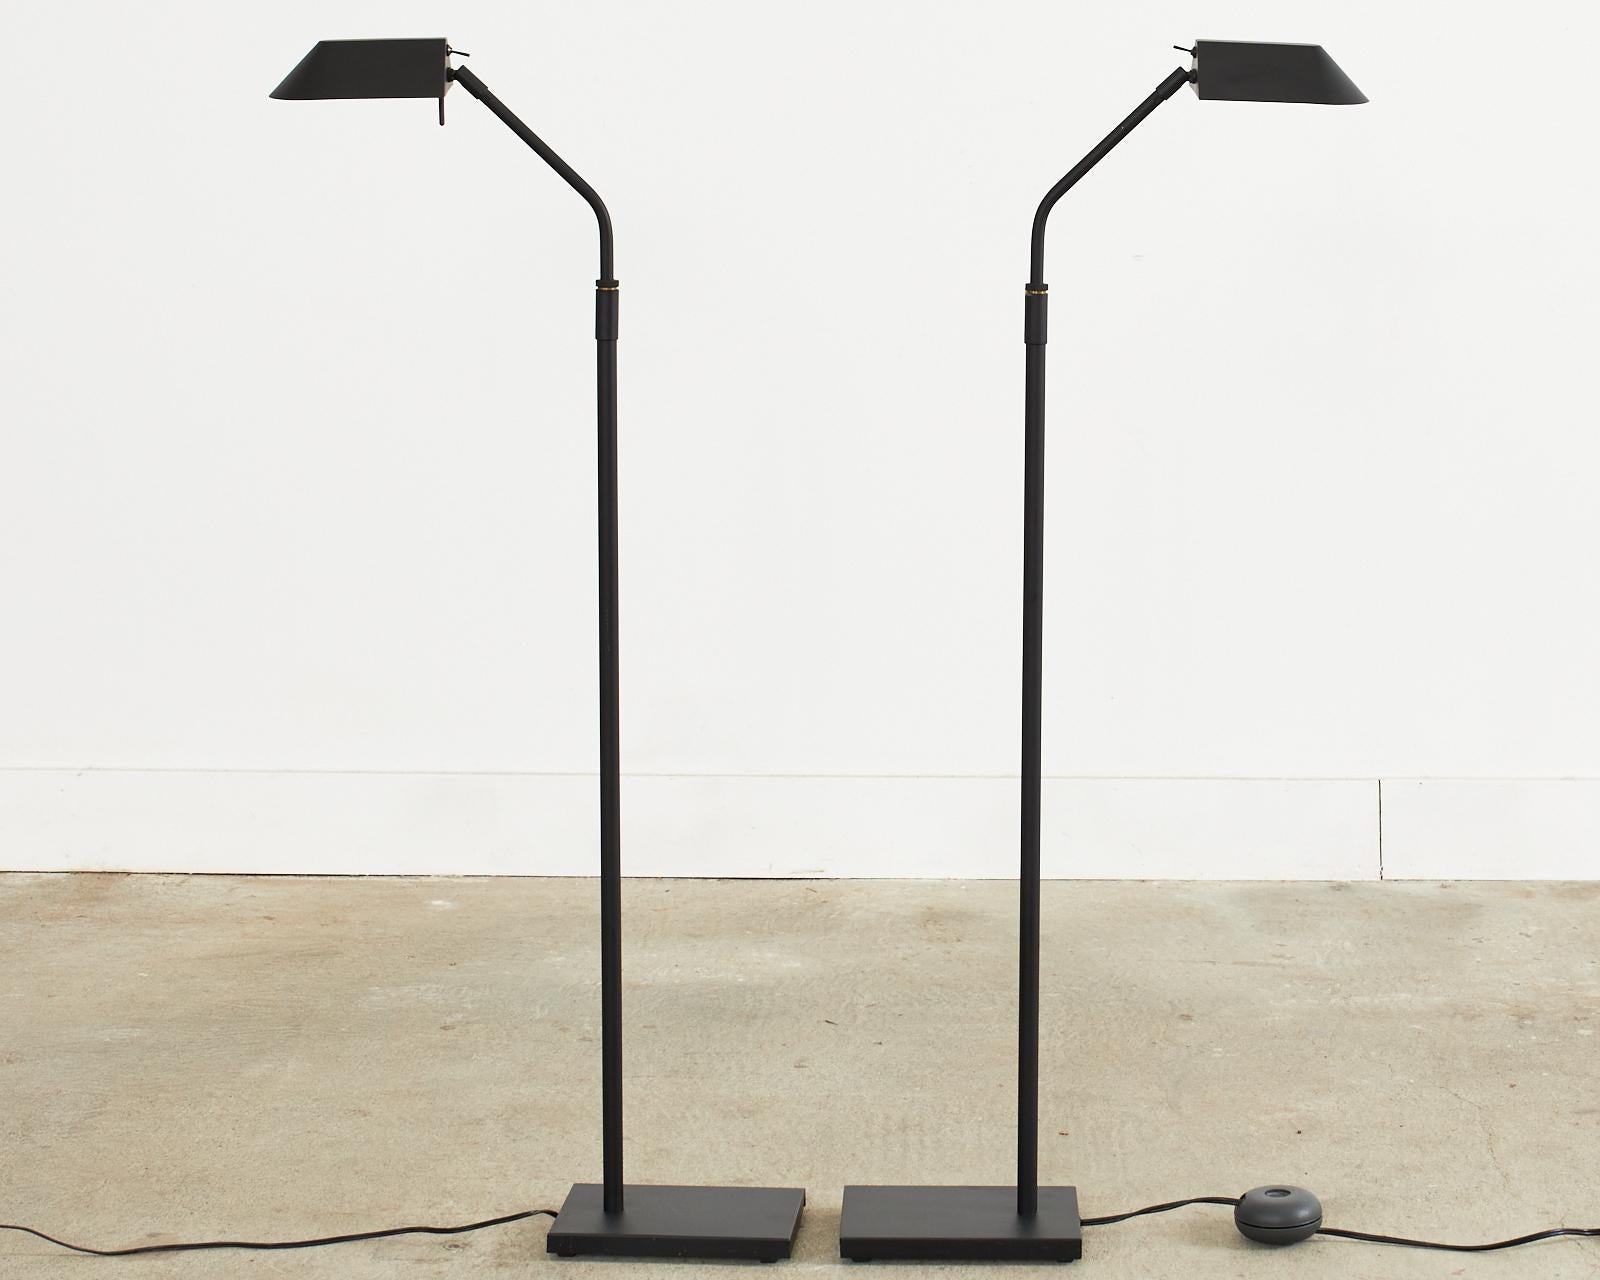 Mid-Century Modern pair of height adjustable pharmacy floor lamps designed by Robert Sonneman for George Kovacs. The lamps have a steel frame with a matte black powder-coated finish. The angled columns adjust from approximately 47 inches high to 53